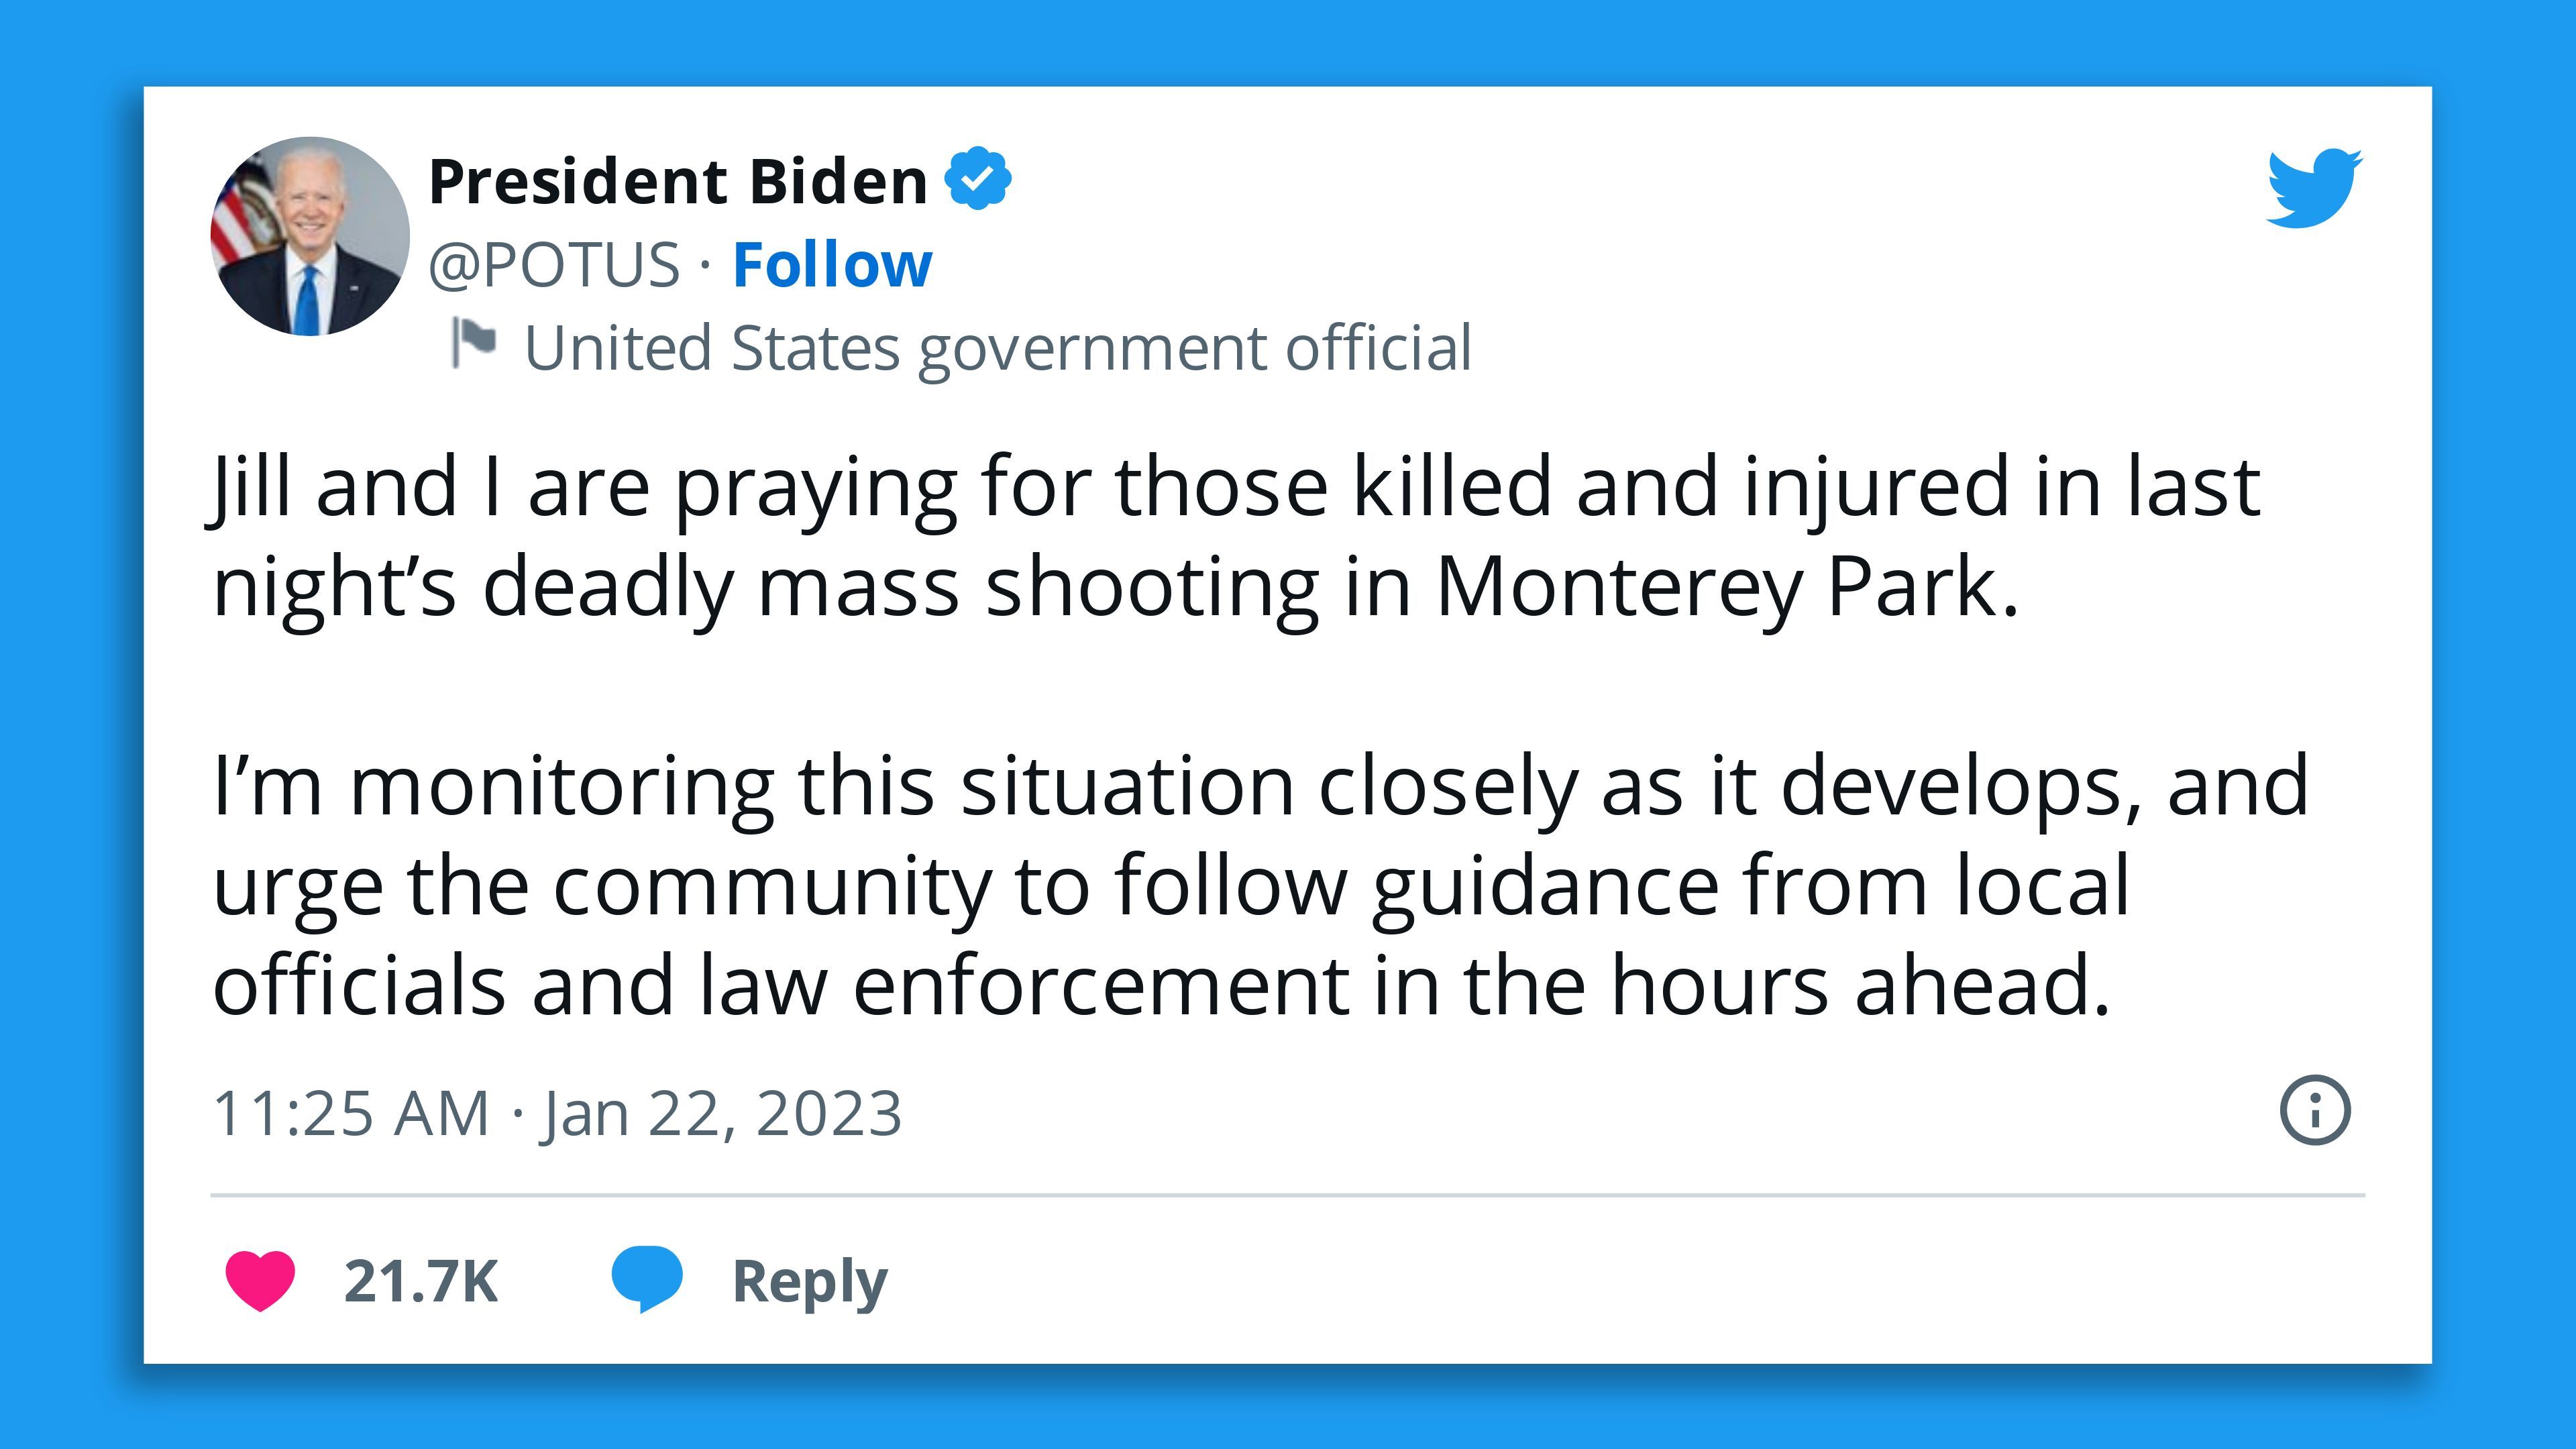 A screenshot of a tweet by President Biden saying he's "praying for those killed and injured in last night’s deadly mass shooting in Monterey Park," adding that he's monitoring the situation closely.